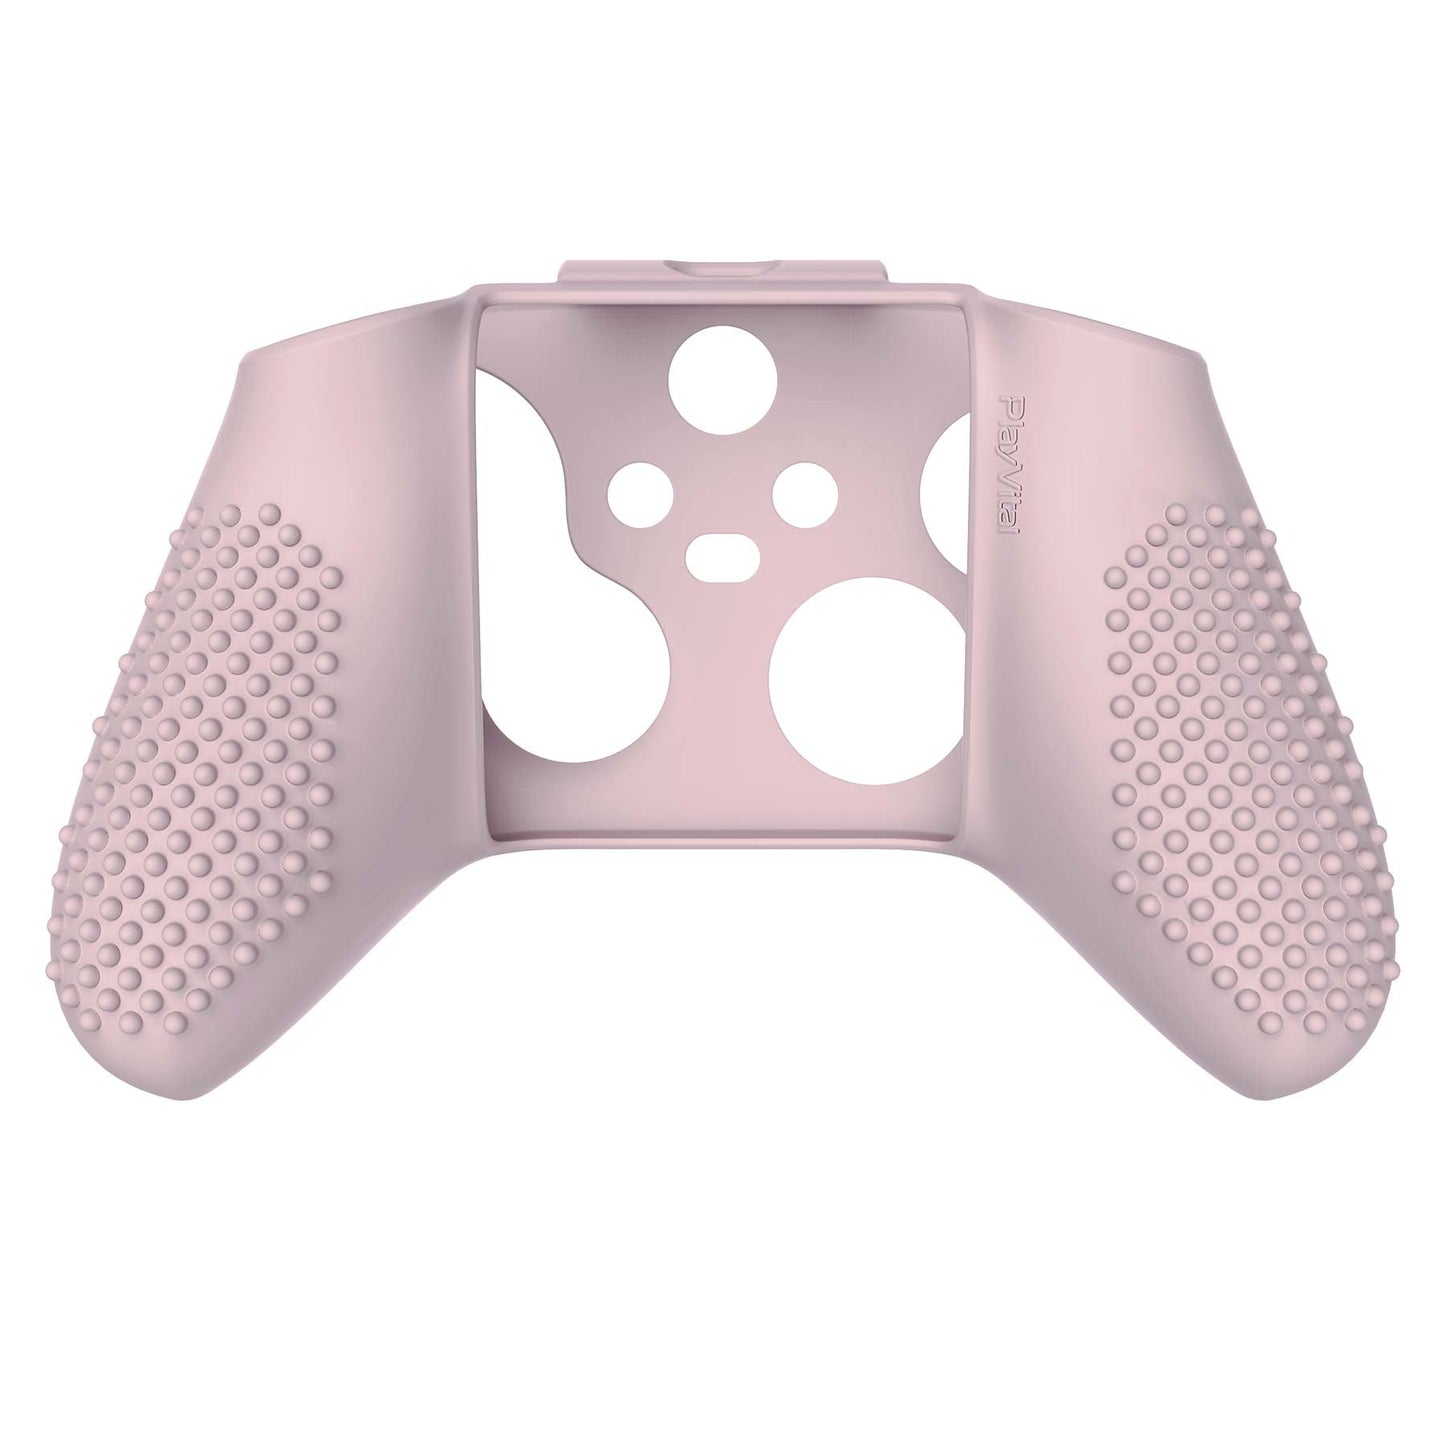 PlayVital Pink 3D Studded Edition Anti-slip Silicone Cover Skin for Xbox Series X Controller, Soft Rubber Case Protector for Xbox Series S Controller with 6 Black Thumb Grip Caps - SDX3005 PlayVital